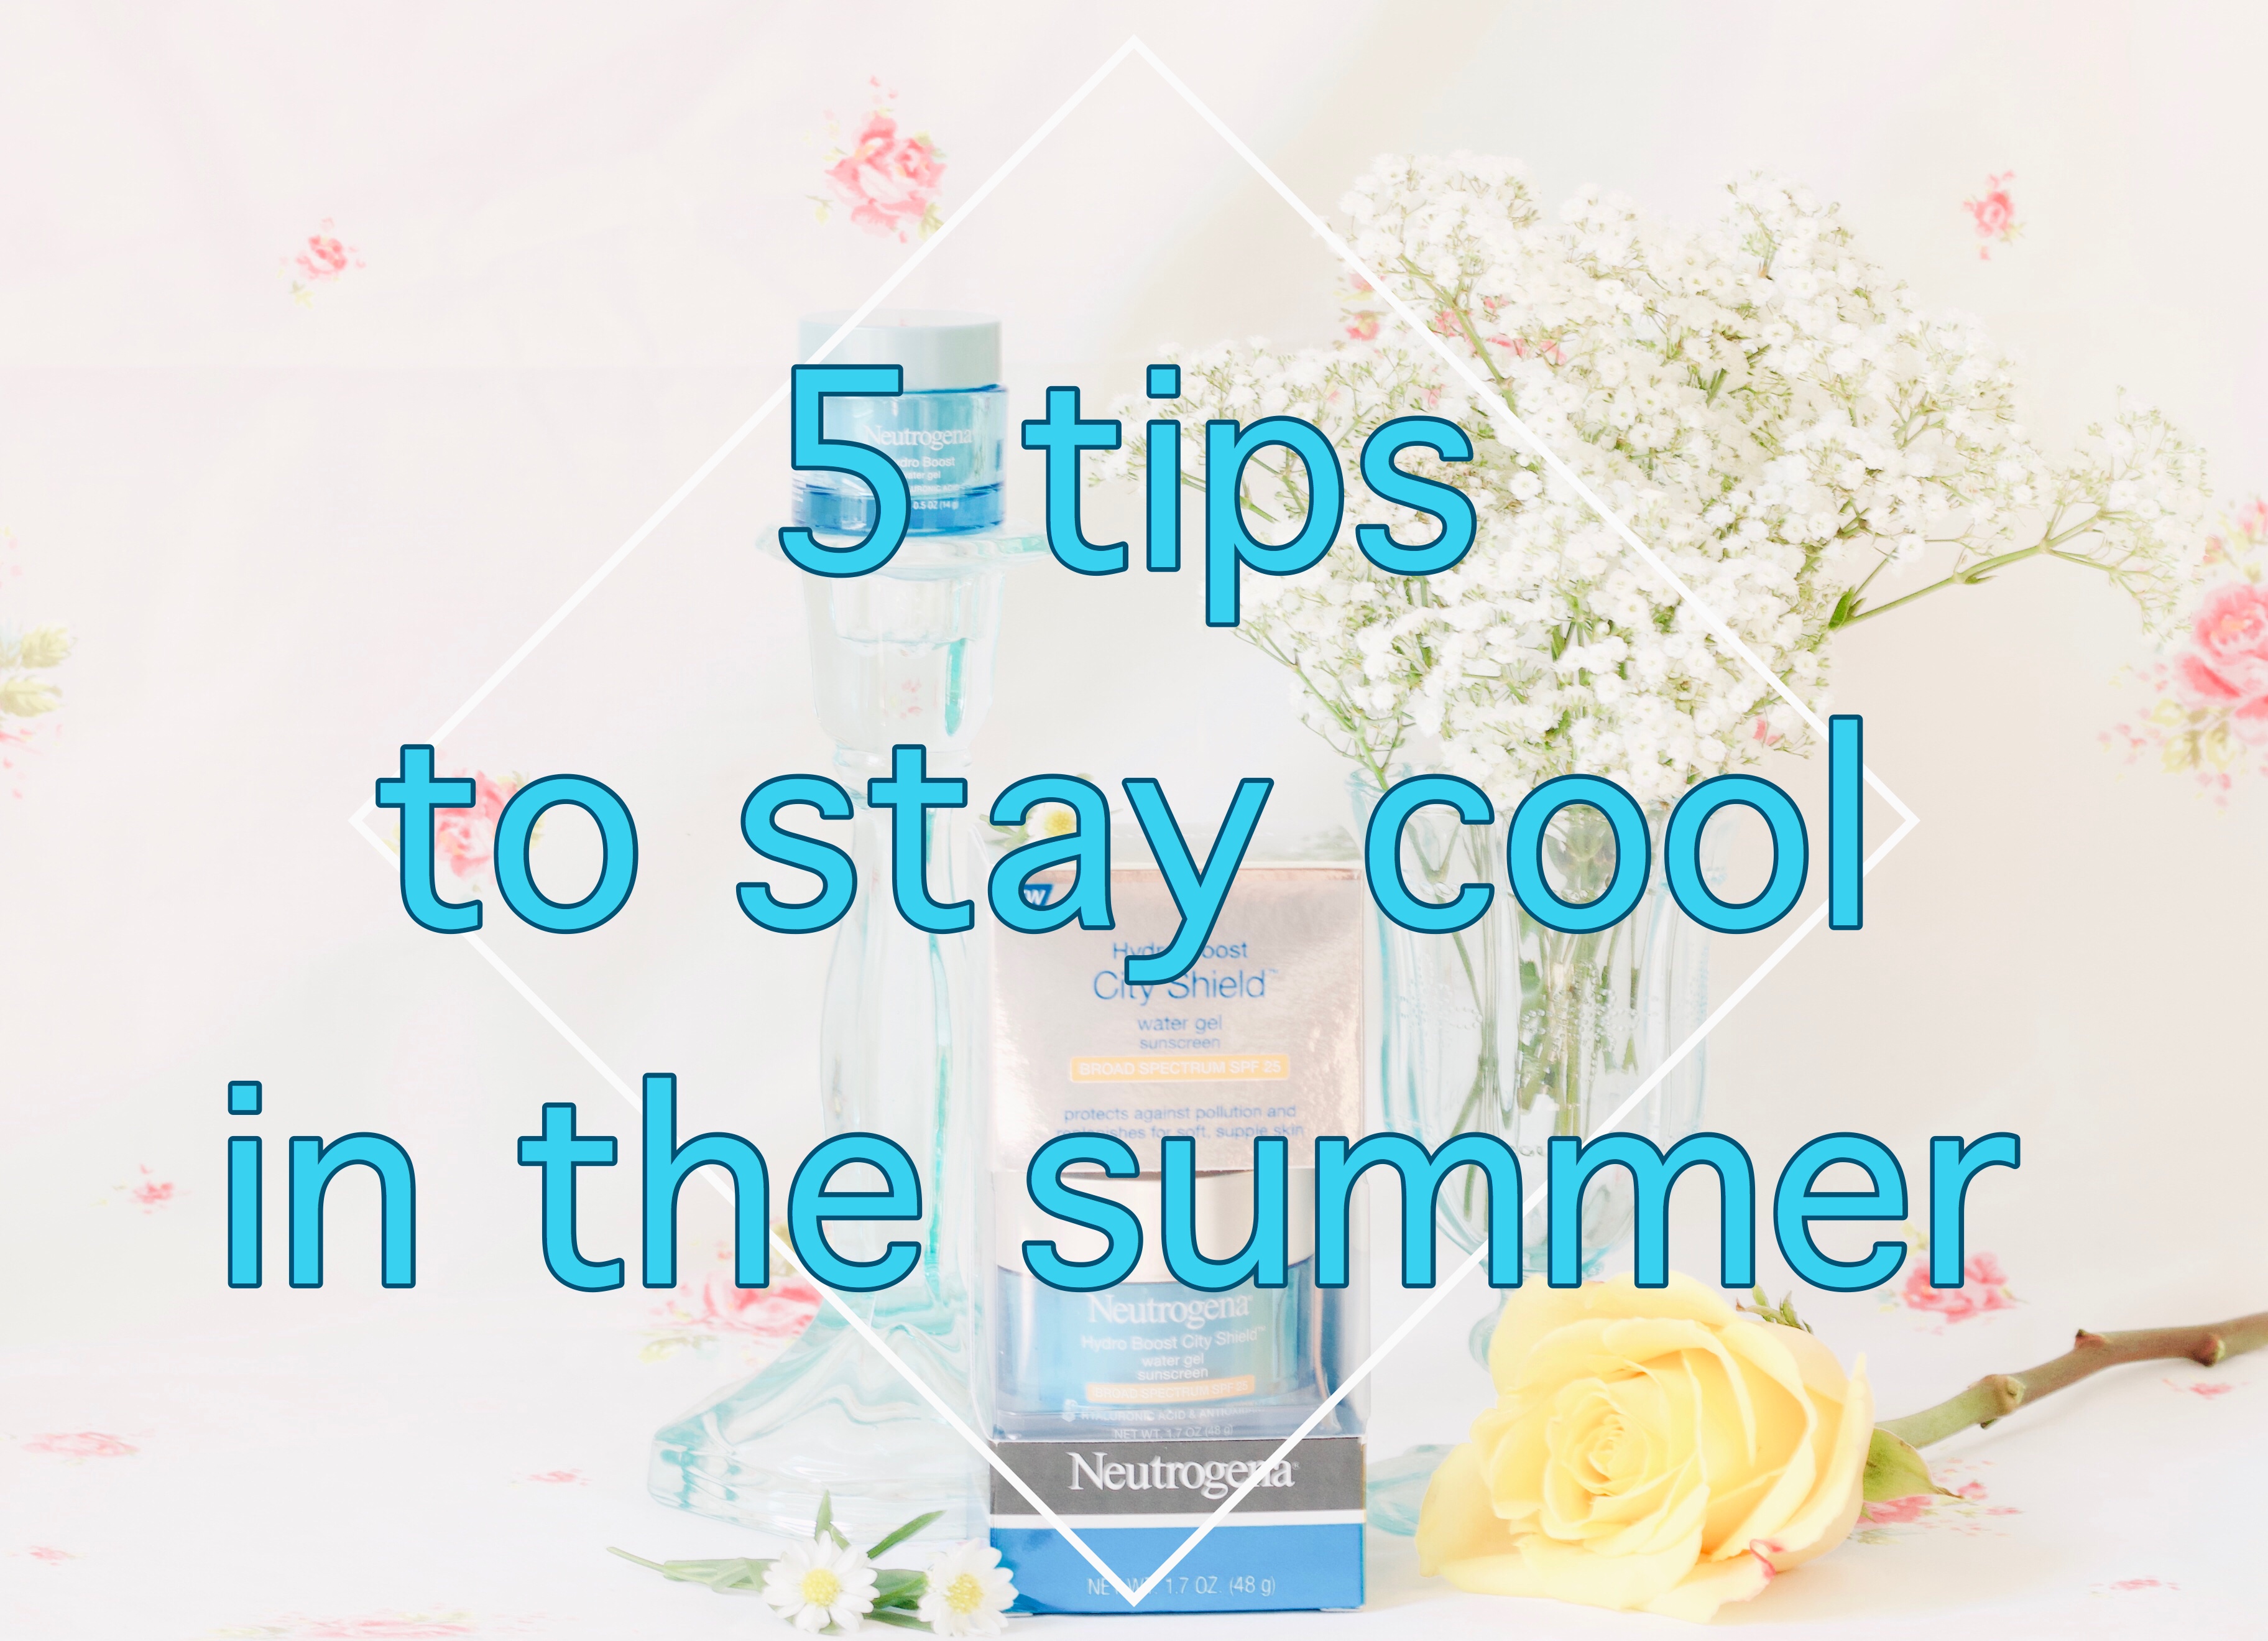 5 tips to stay cool in the summer